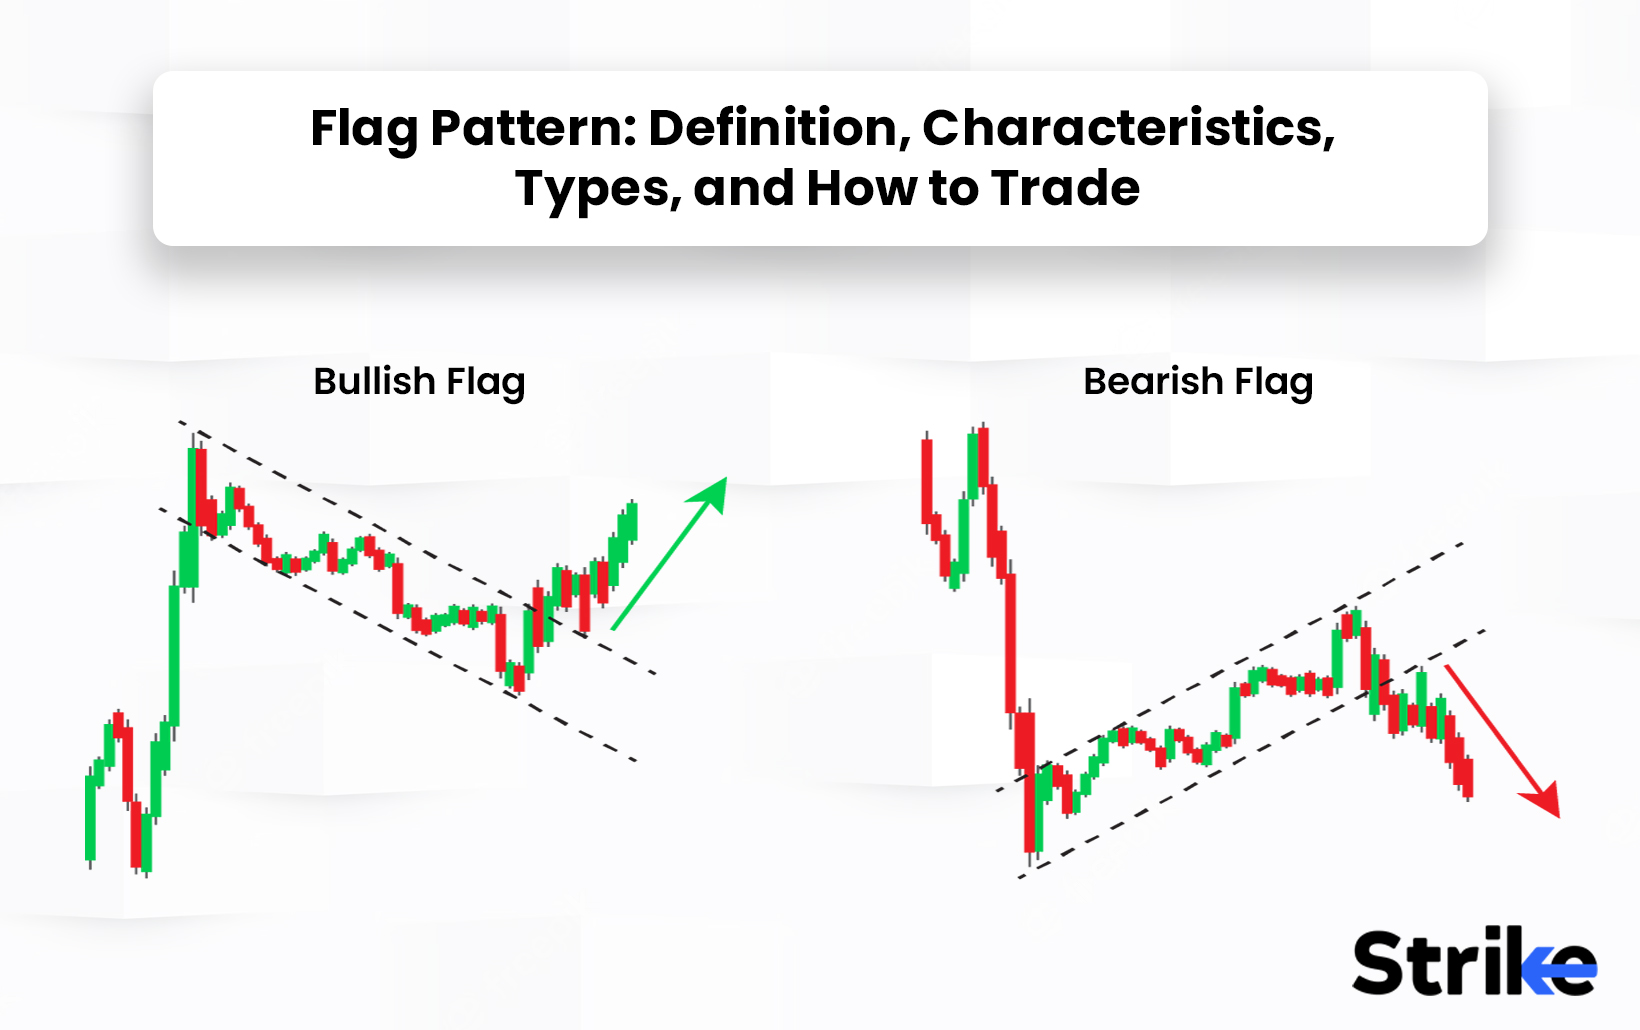 Flag Pattern: Definition, Characteristics, Types, and How to Trade